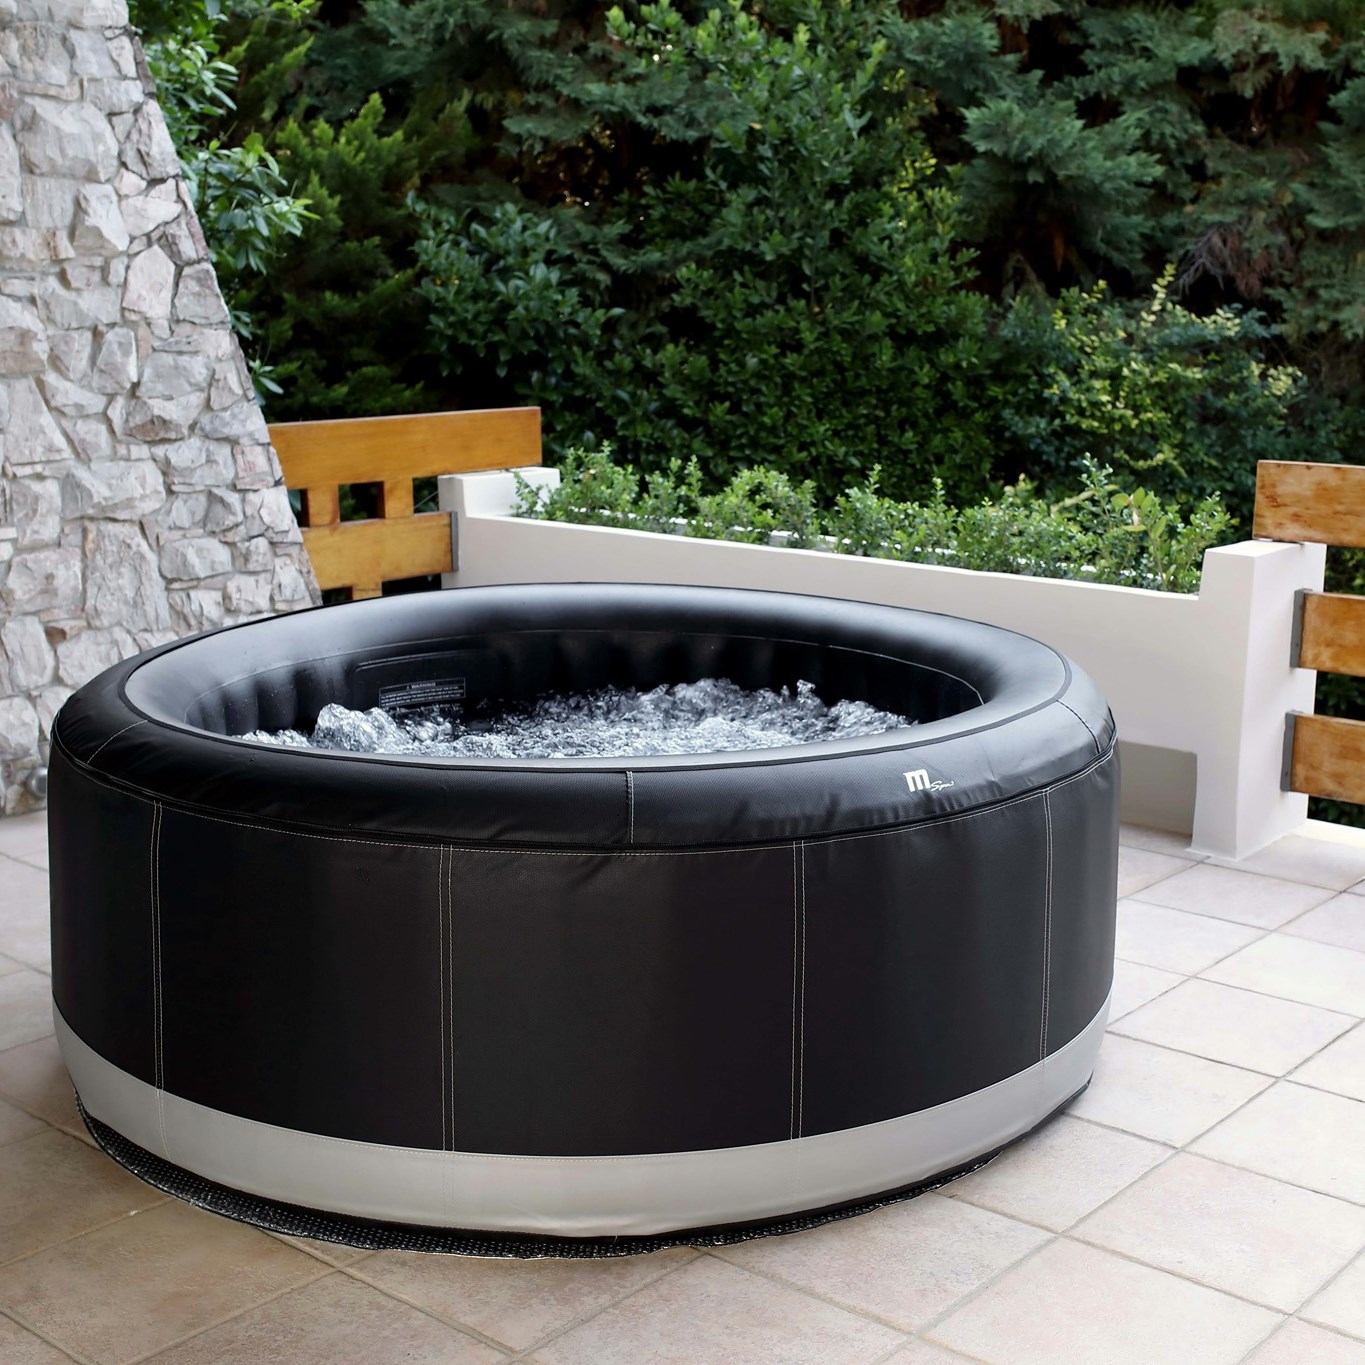 138 AIR JETS | 6 PERSON

Pamper yourself with uplifting, renewing bubble spa. Perfectly placed air jets release thousand... » Outdoor Furniture Fuengirola, Costa Del Sol, Spain